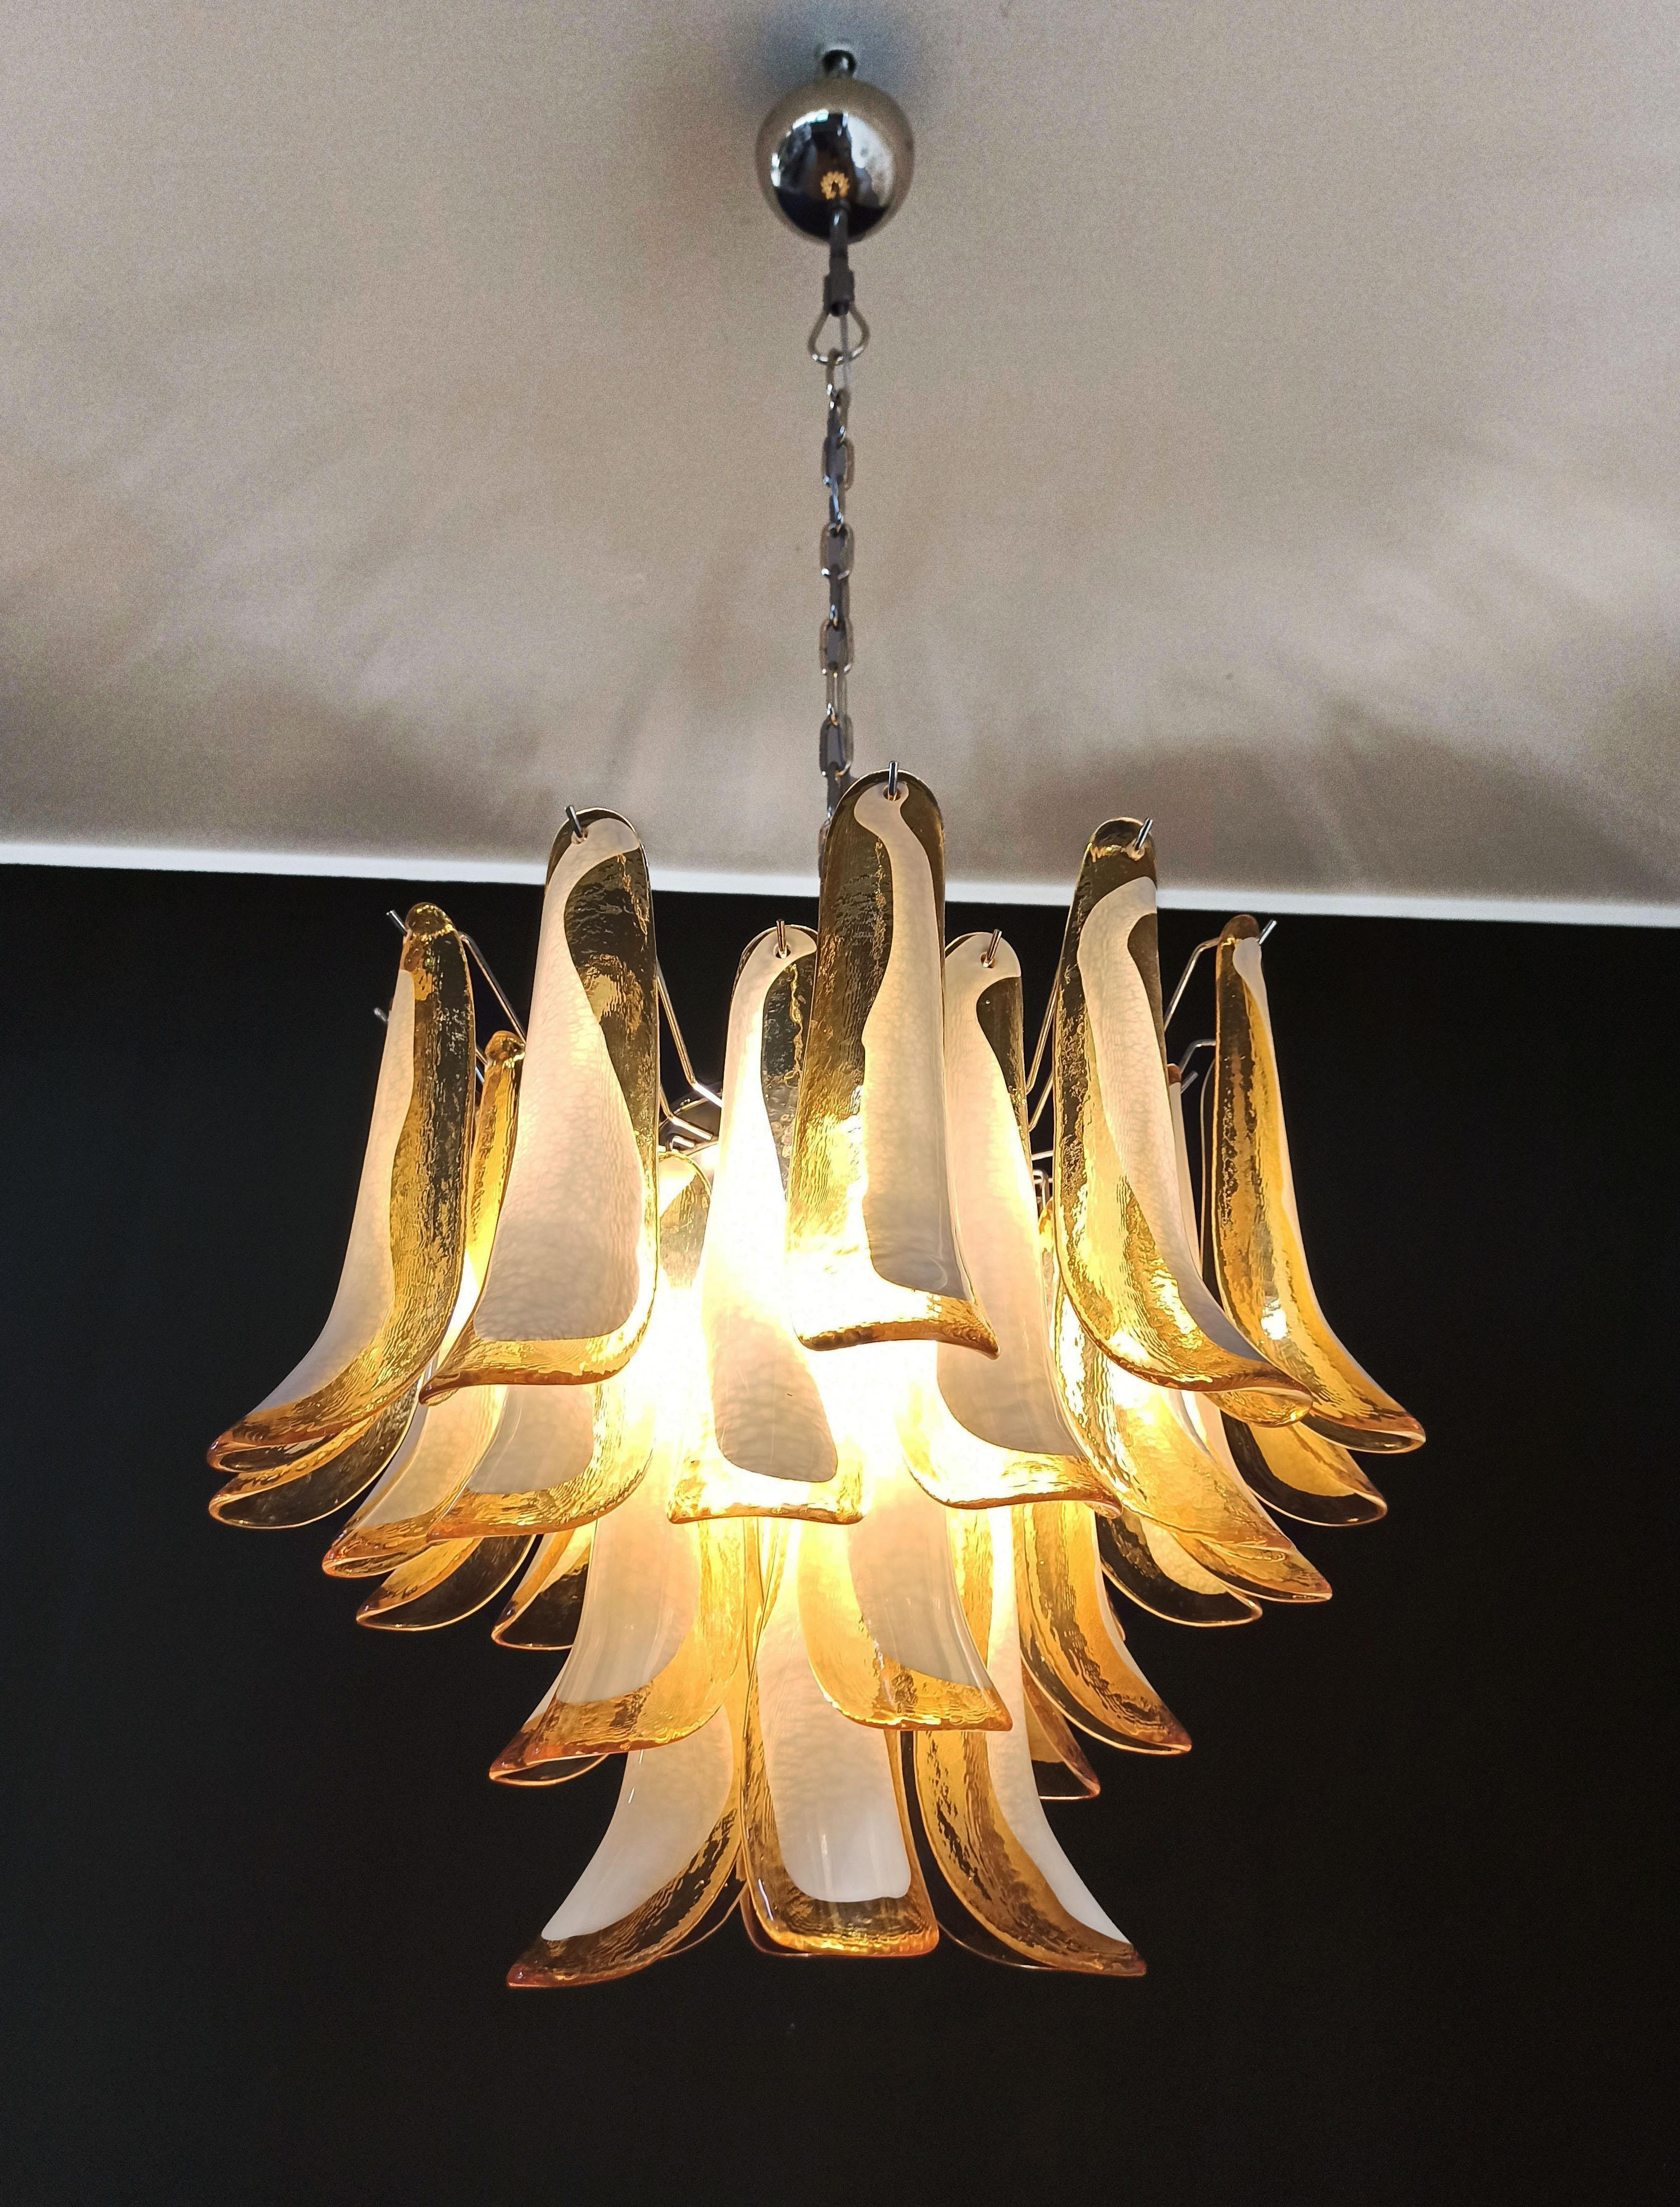 1970’s Murano Italian glass chandelier. Fantastic chandelier with amber and white “lattimo” glasses, nickel-plated metal frame. It has 36 big monumental petals glass. The glasses are very high quality, the photos do not do the beauty, luster of